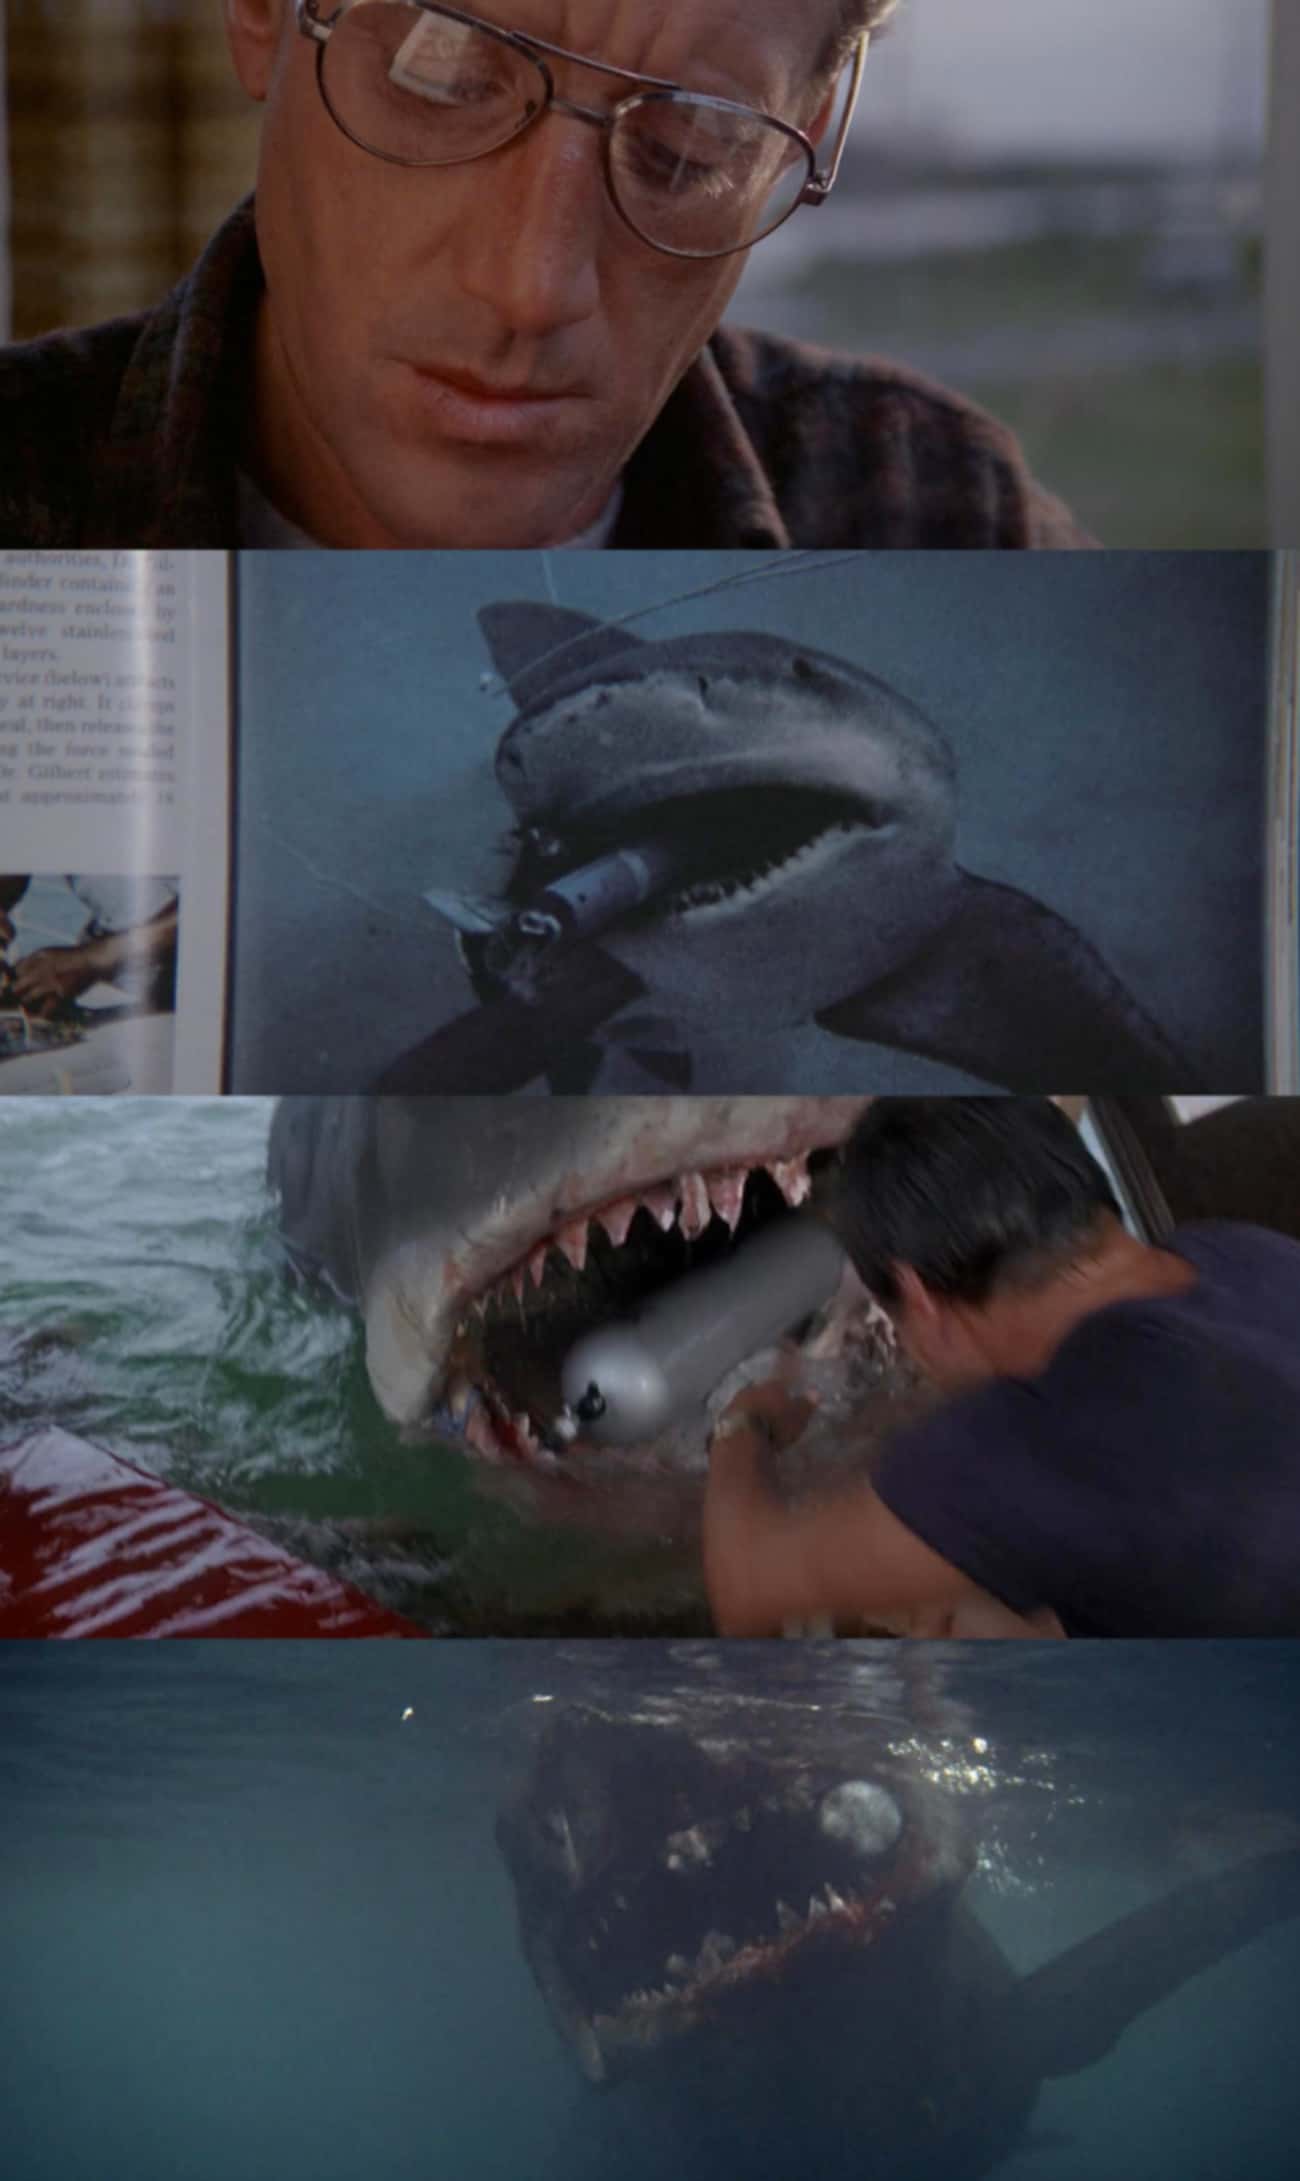 The Book Brody Reads In 'Jaws' Foreshadows The Ending